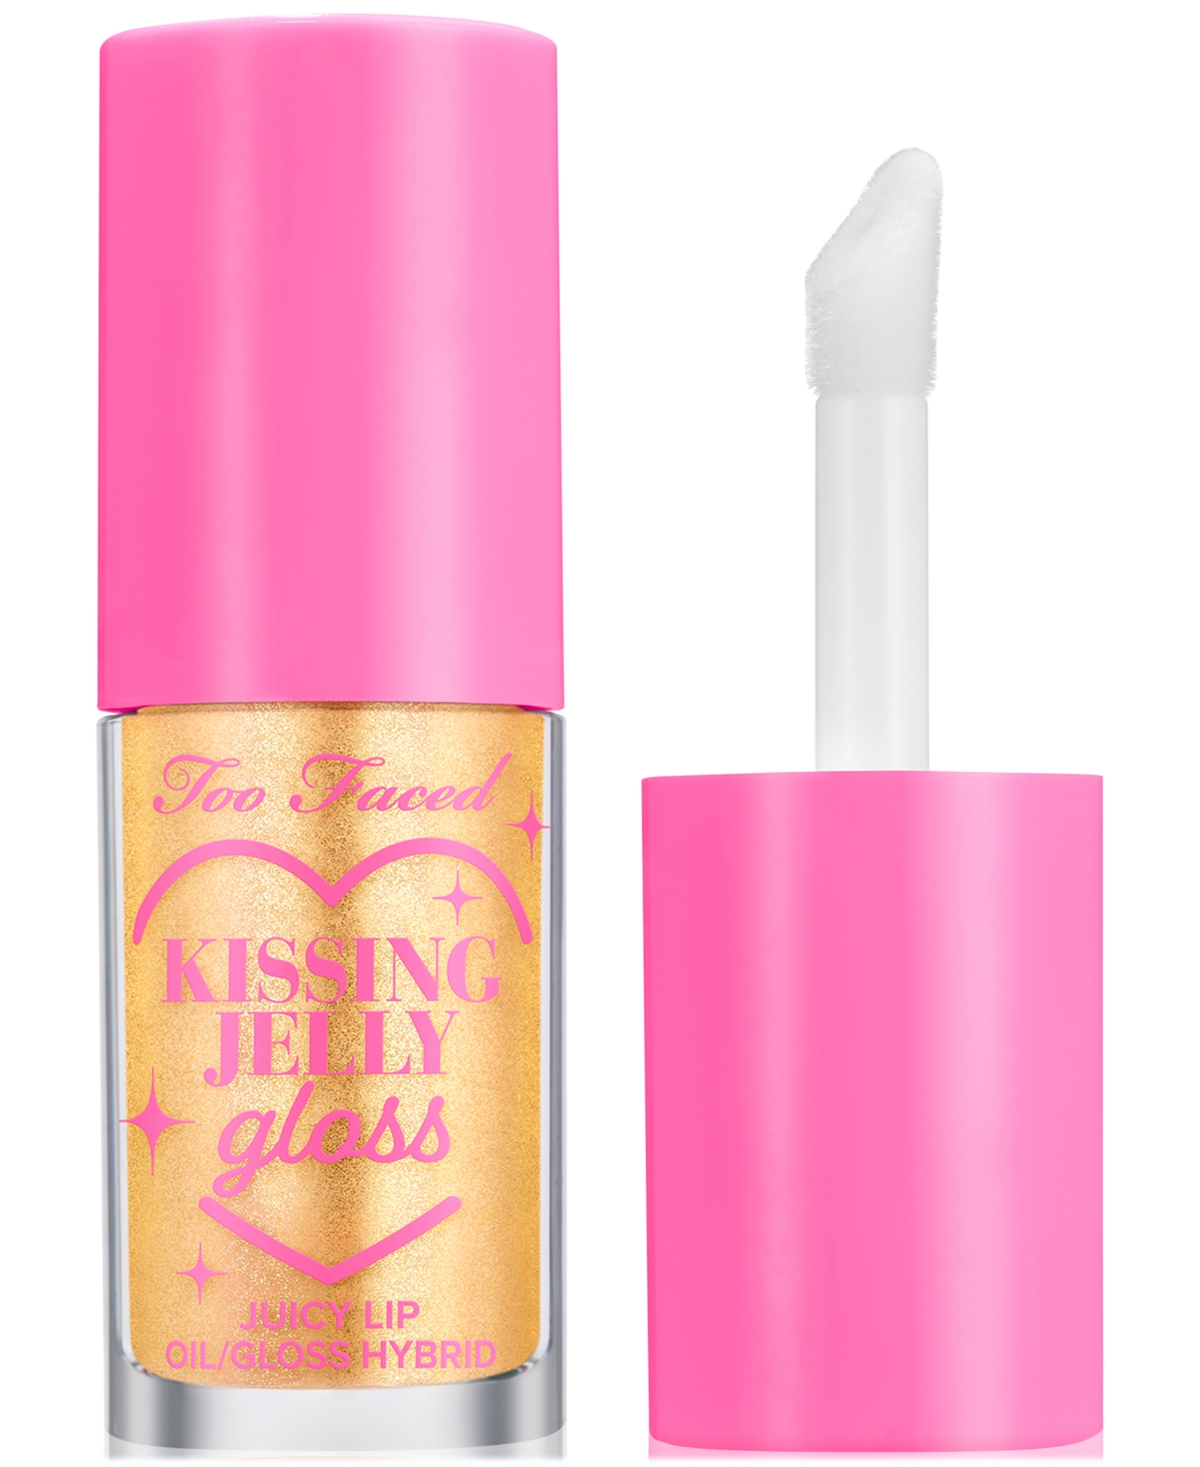 Too Faced Kissing Jelly Gloss In Pina Colada